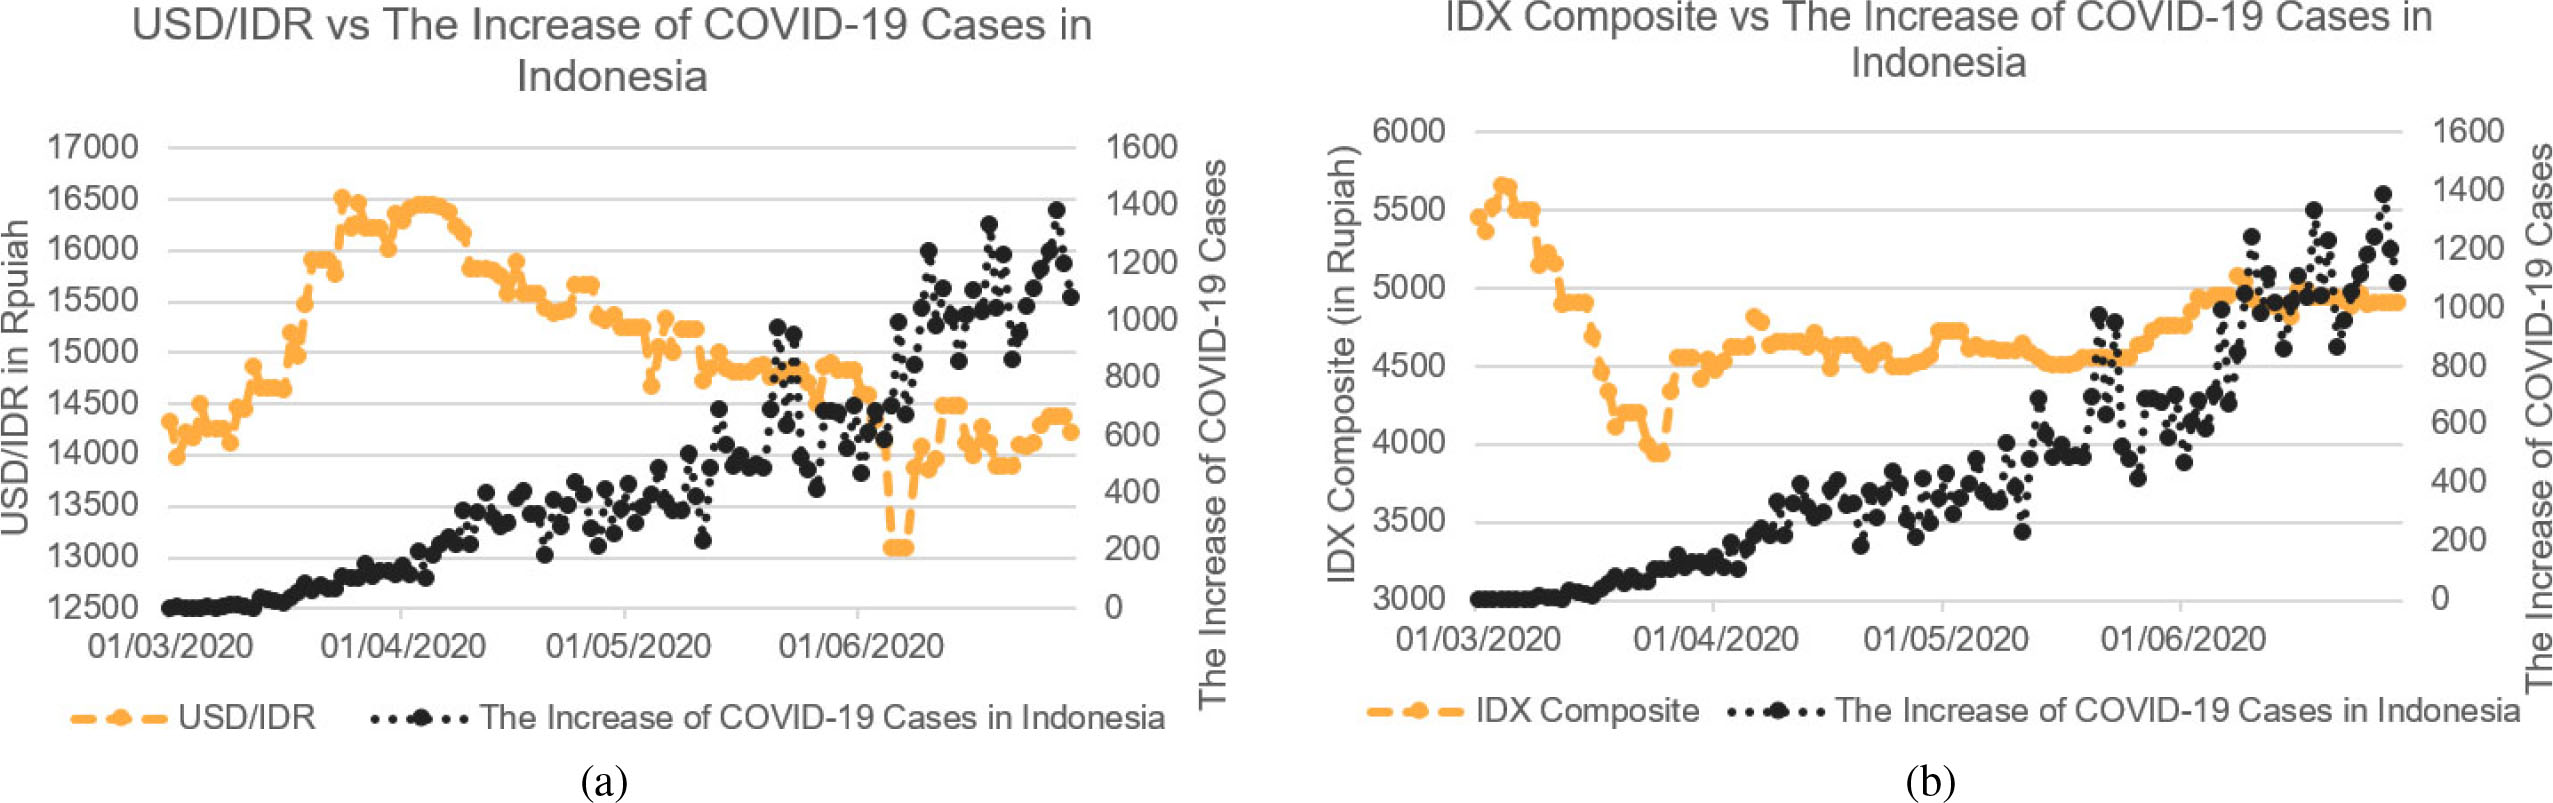 USD/IDR exchange rate vs the increase of COVID-19 cases time series plot (a) and IDX composite vs The Increase of COVID-19 Cases time series plot (b). It can be seen that as the number of COVID-19 cases in Indonesia increases, both the USD/IDR exchange rate and the IDX composite are weakening.